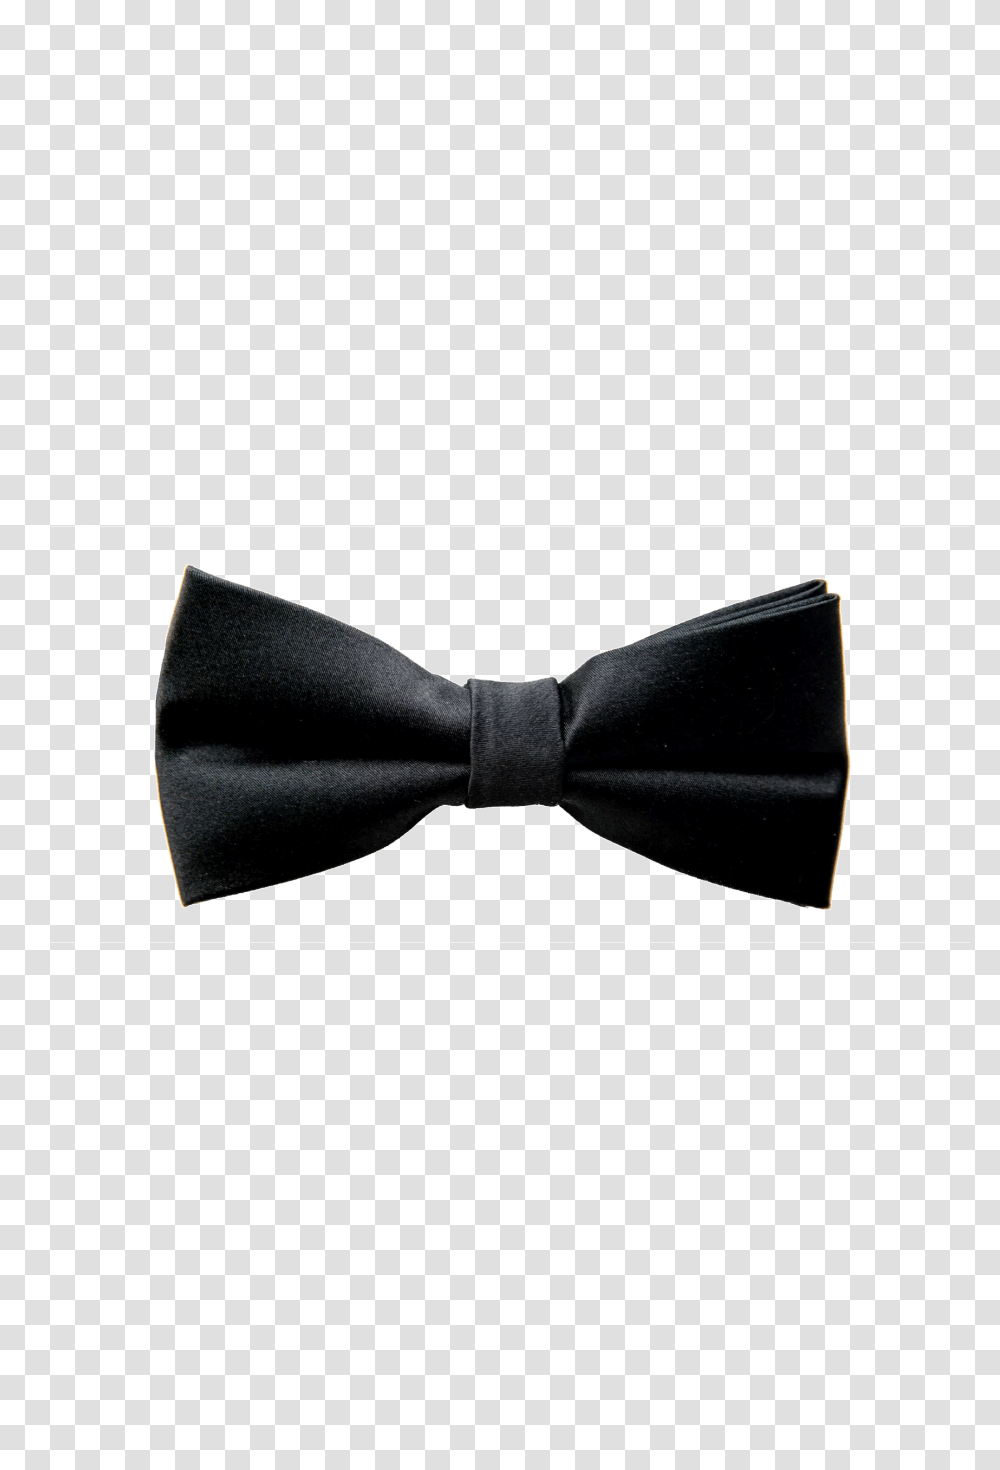 Get The Black Bow Tie In Black Online, Accessories, Accessory, Necktie Transparent Png